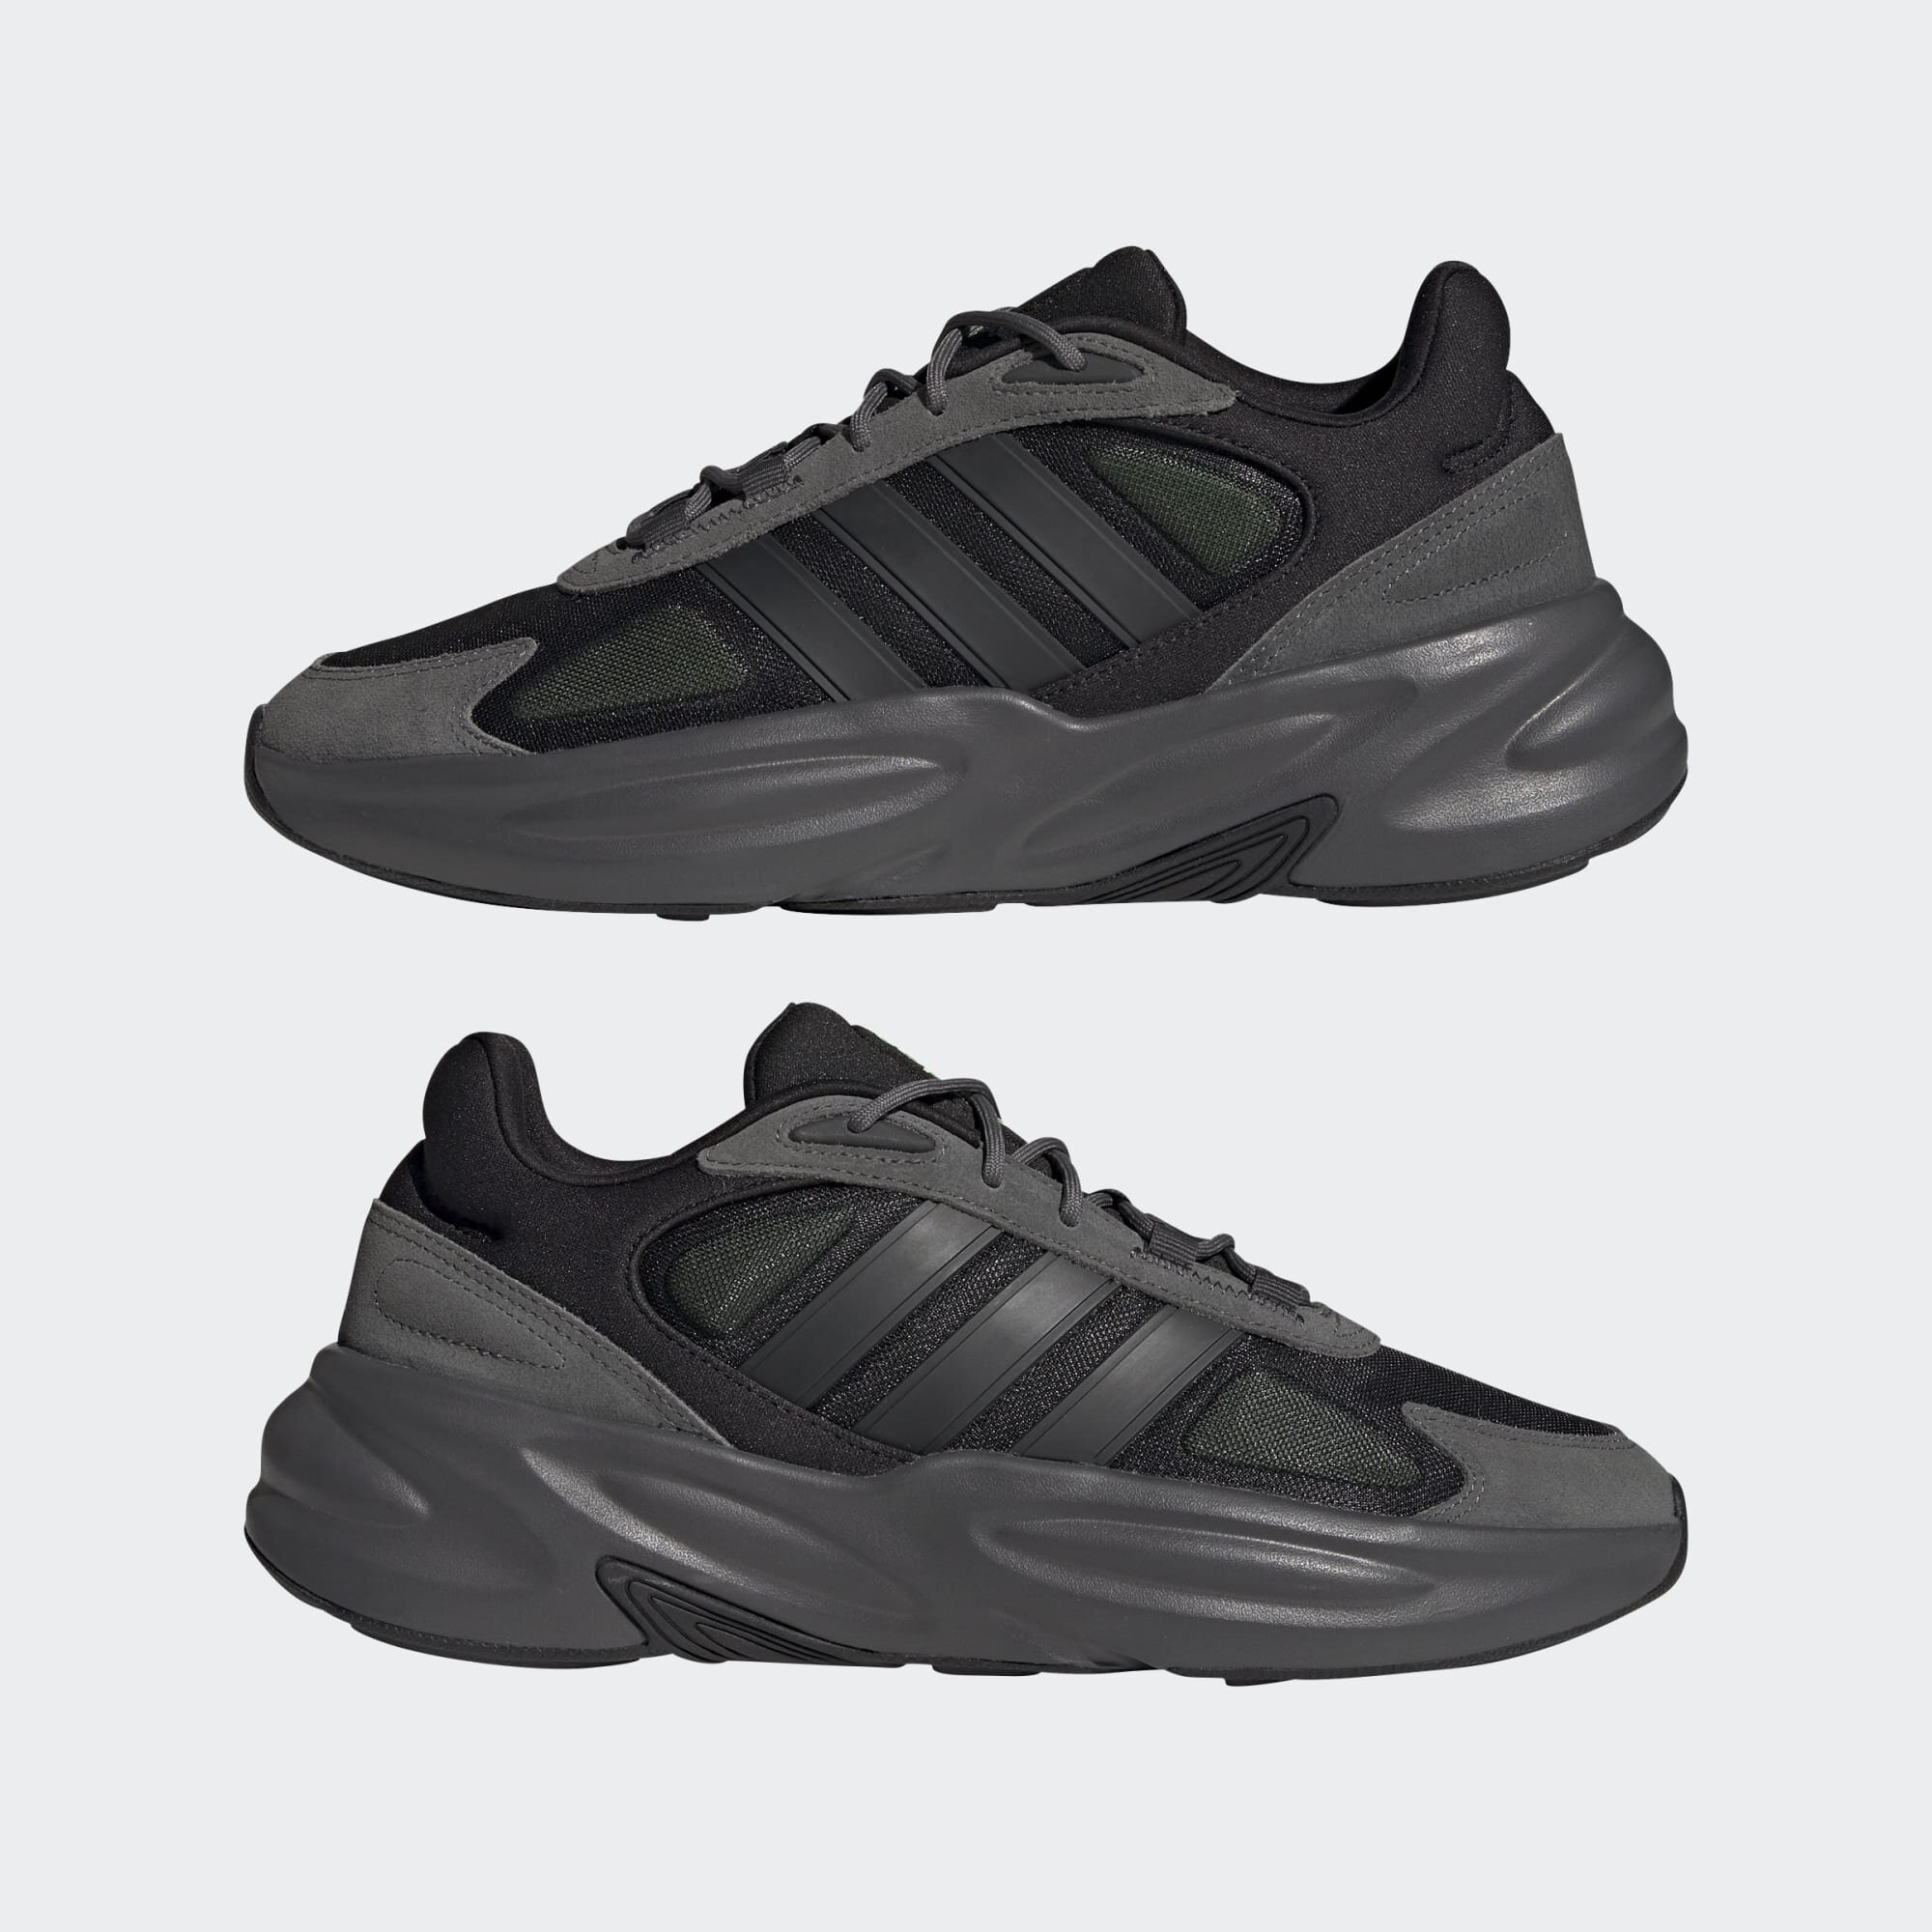 Verbeteren contant geld Uittreksel Adidas Ozelle Cloudfoam Lifestyle Running Shoes Mens - Buy Online - Ph:  1800-370-766 - AfterPay & ZipPay Available!